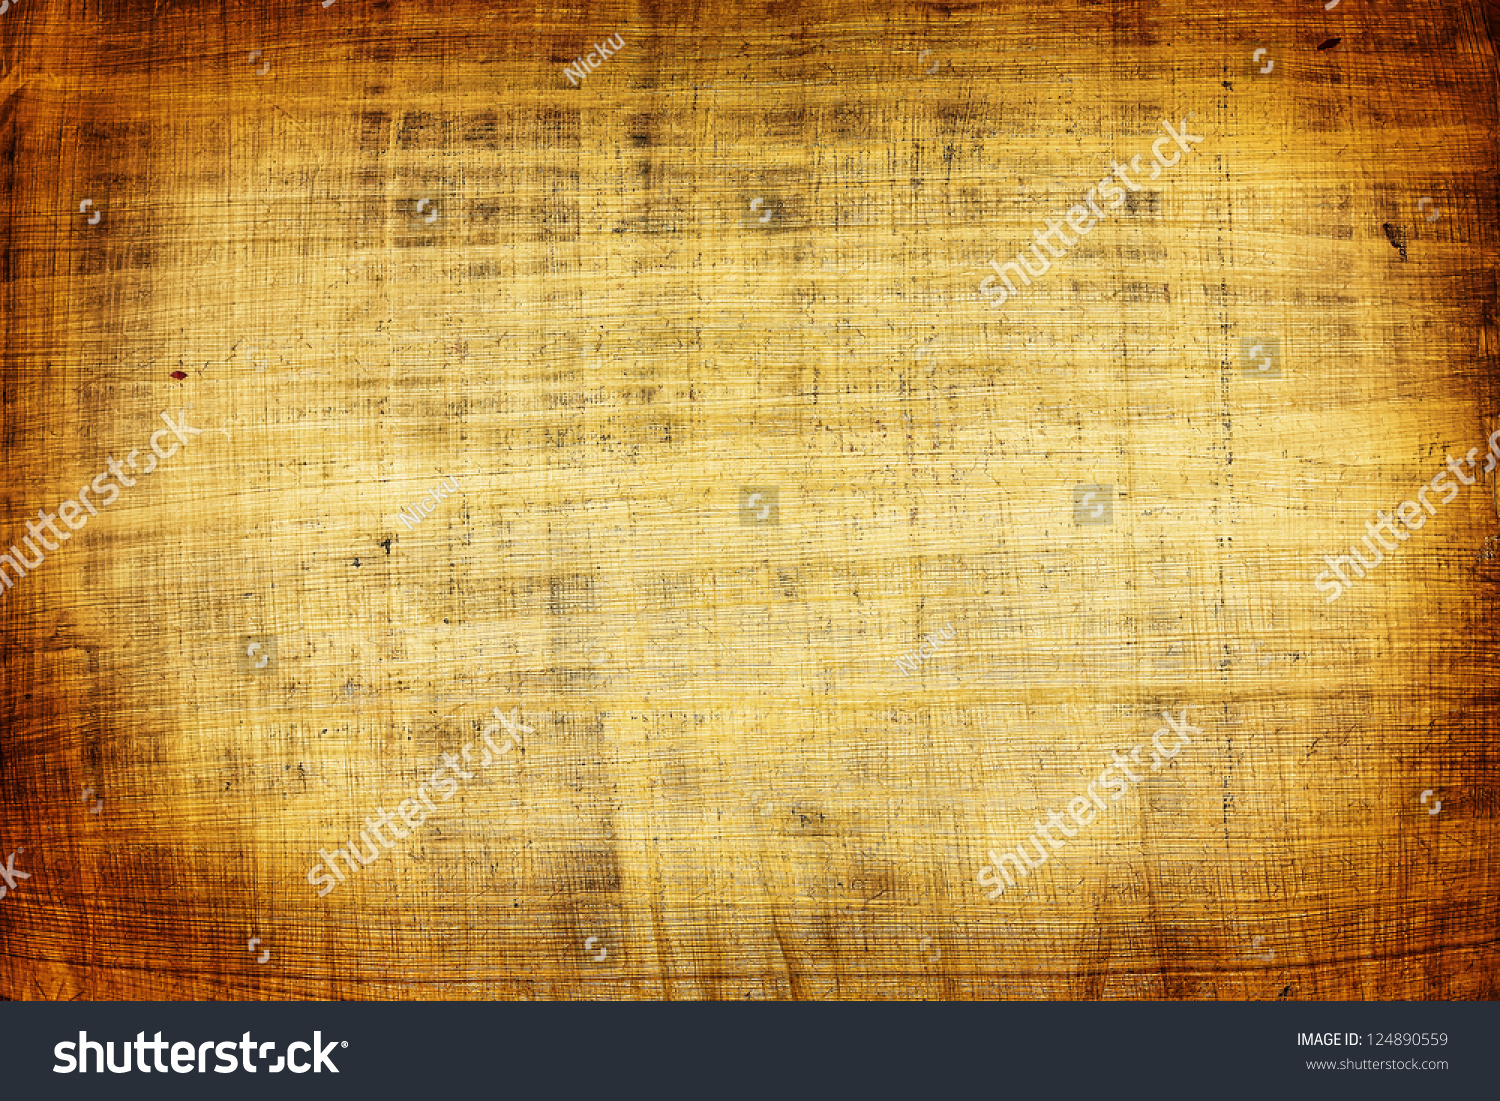 Abstract Papyrus Background Stock Photo